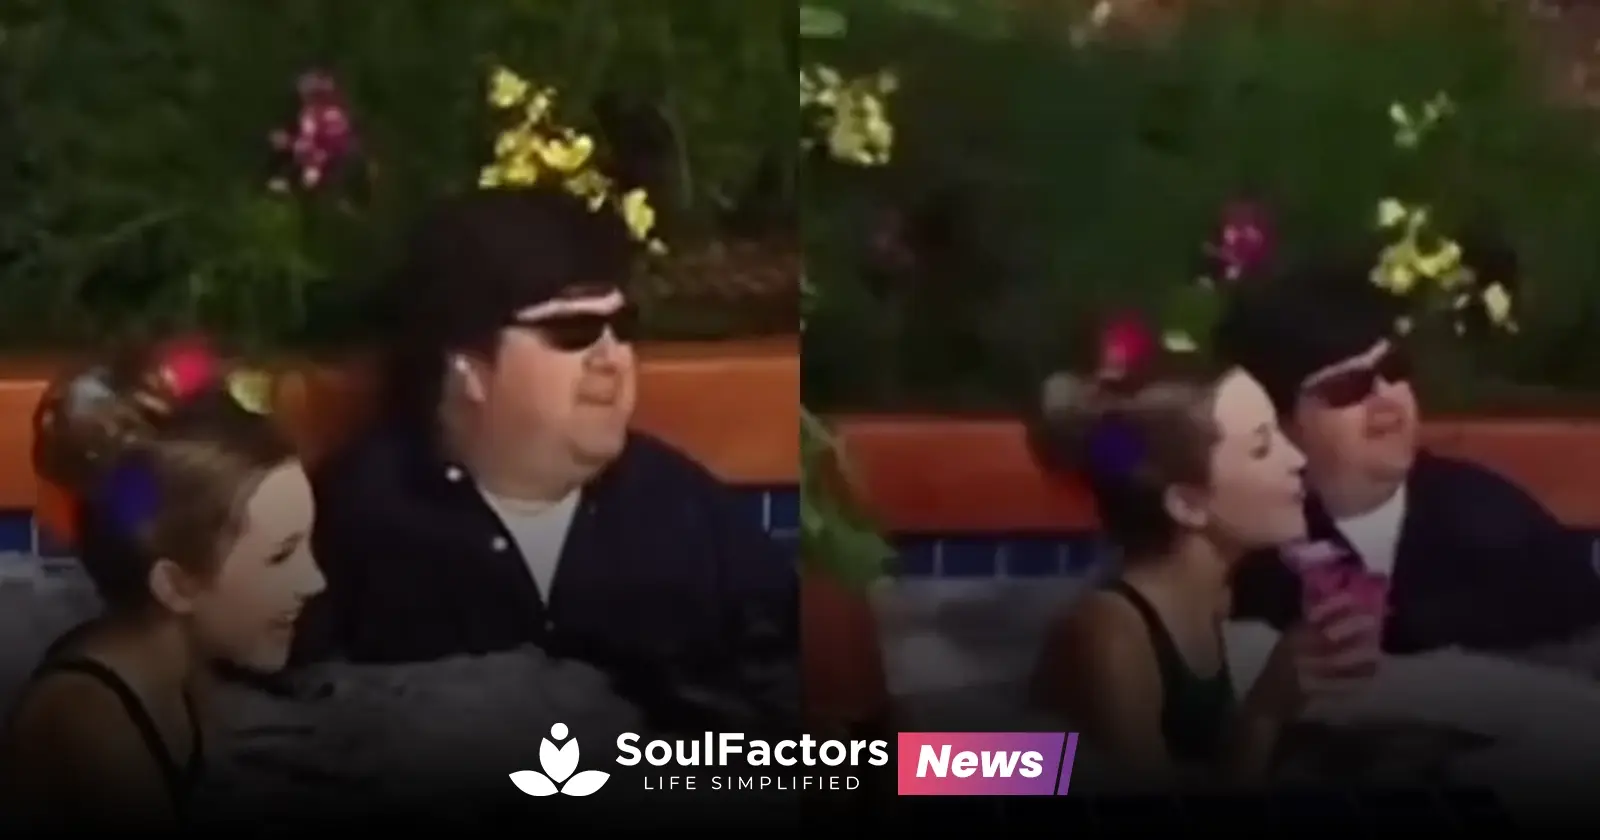 Leaked-Video-Allegedly-Shows-Dan-Schneider-In-Hot-Tub-With-Underage-Amanda-Bynes-